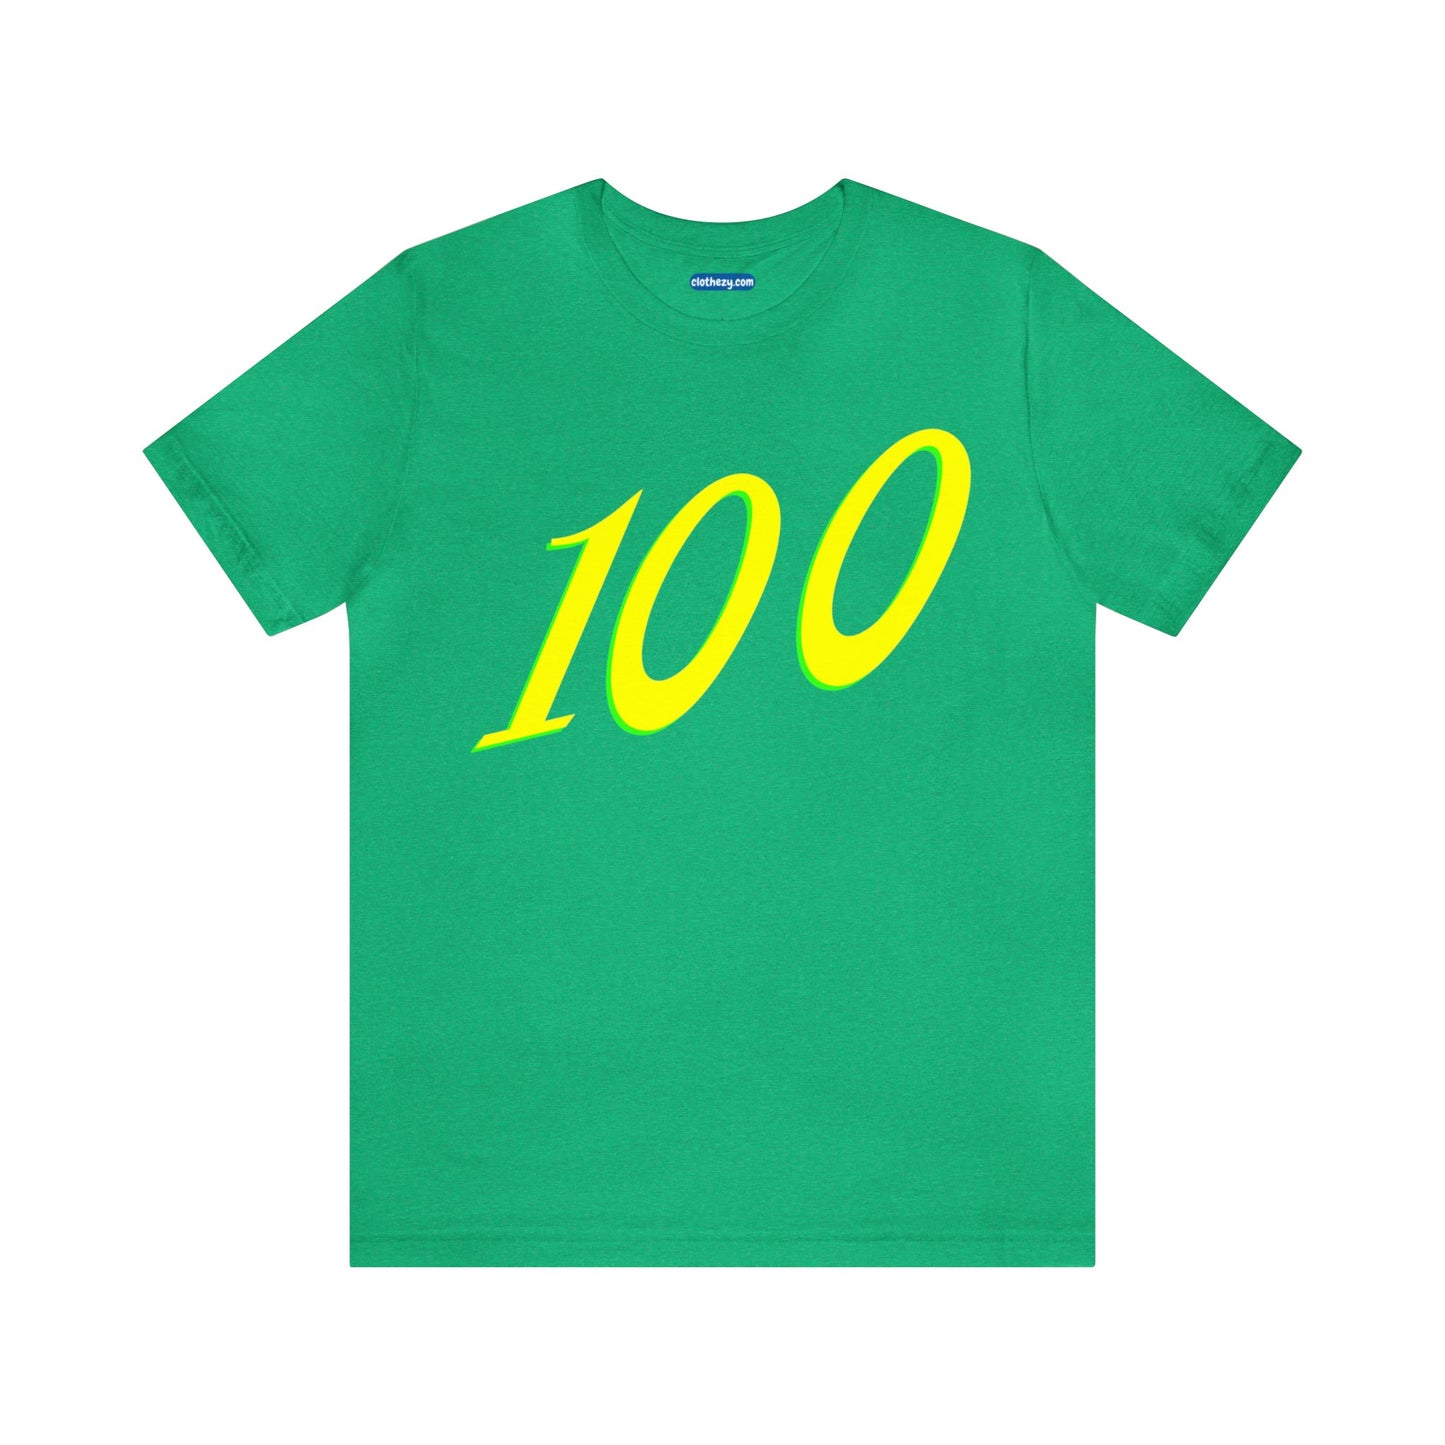 Number 100 Design - Soft Cotton Tee for birthdays and celebrations, Gift for friends and family, Multiple Options by clothezy.com in Green Heather Size Small - Buy Now